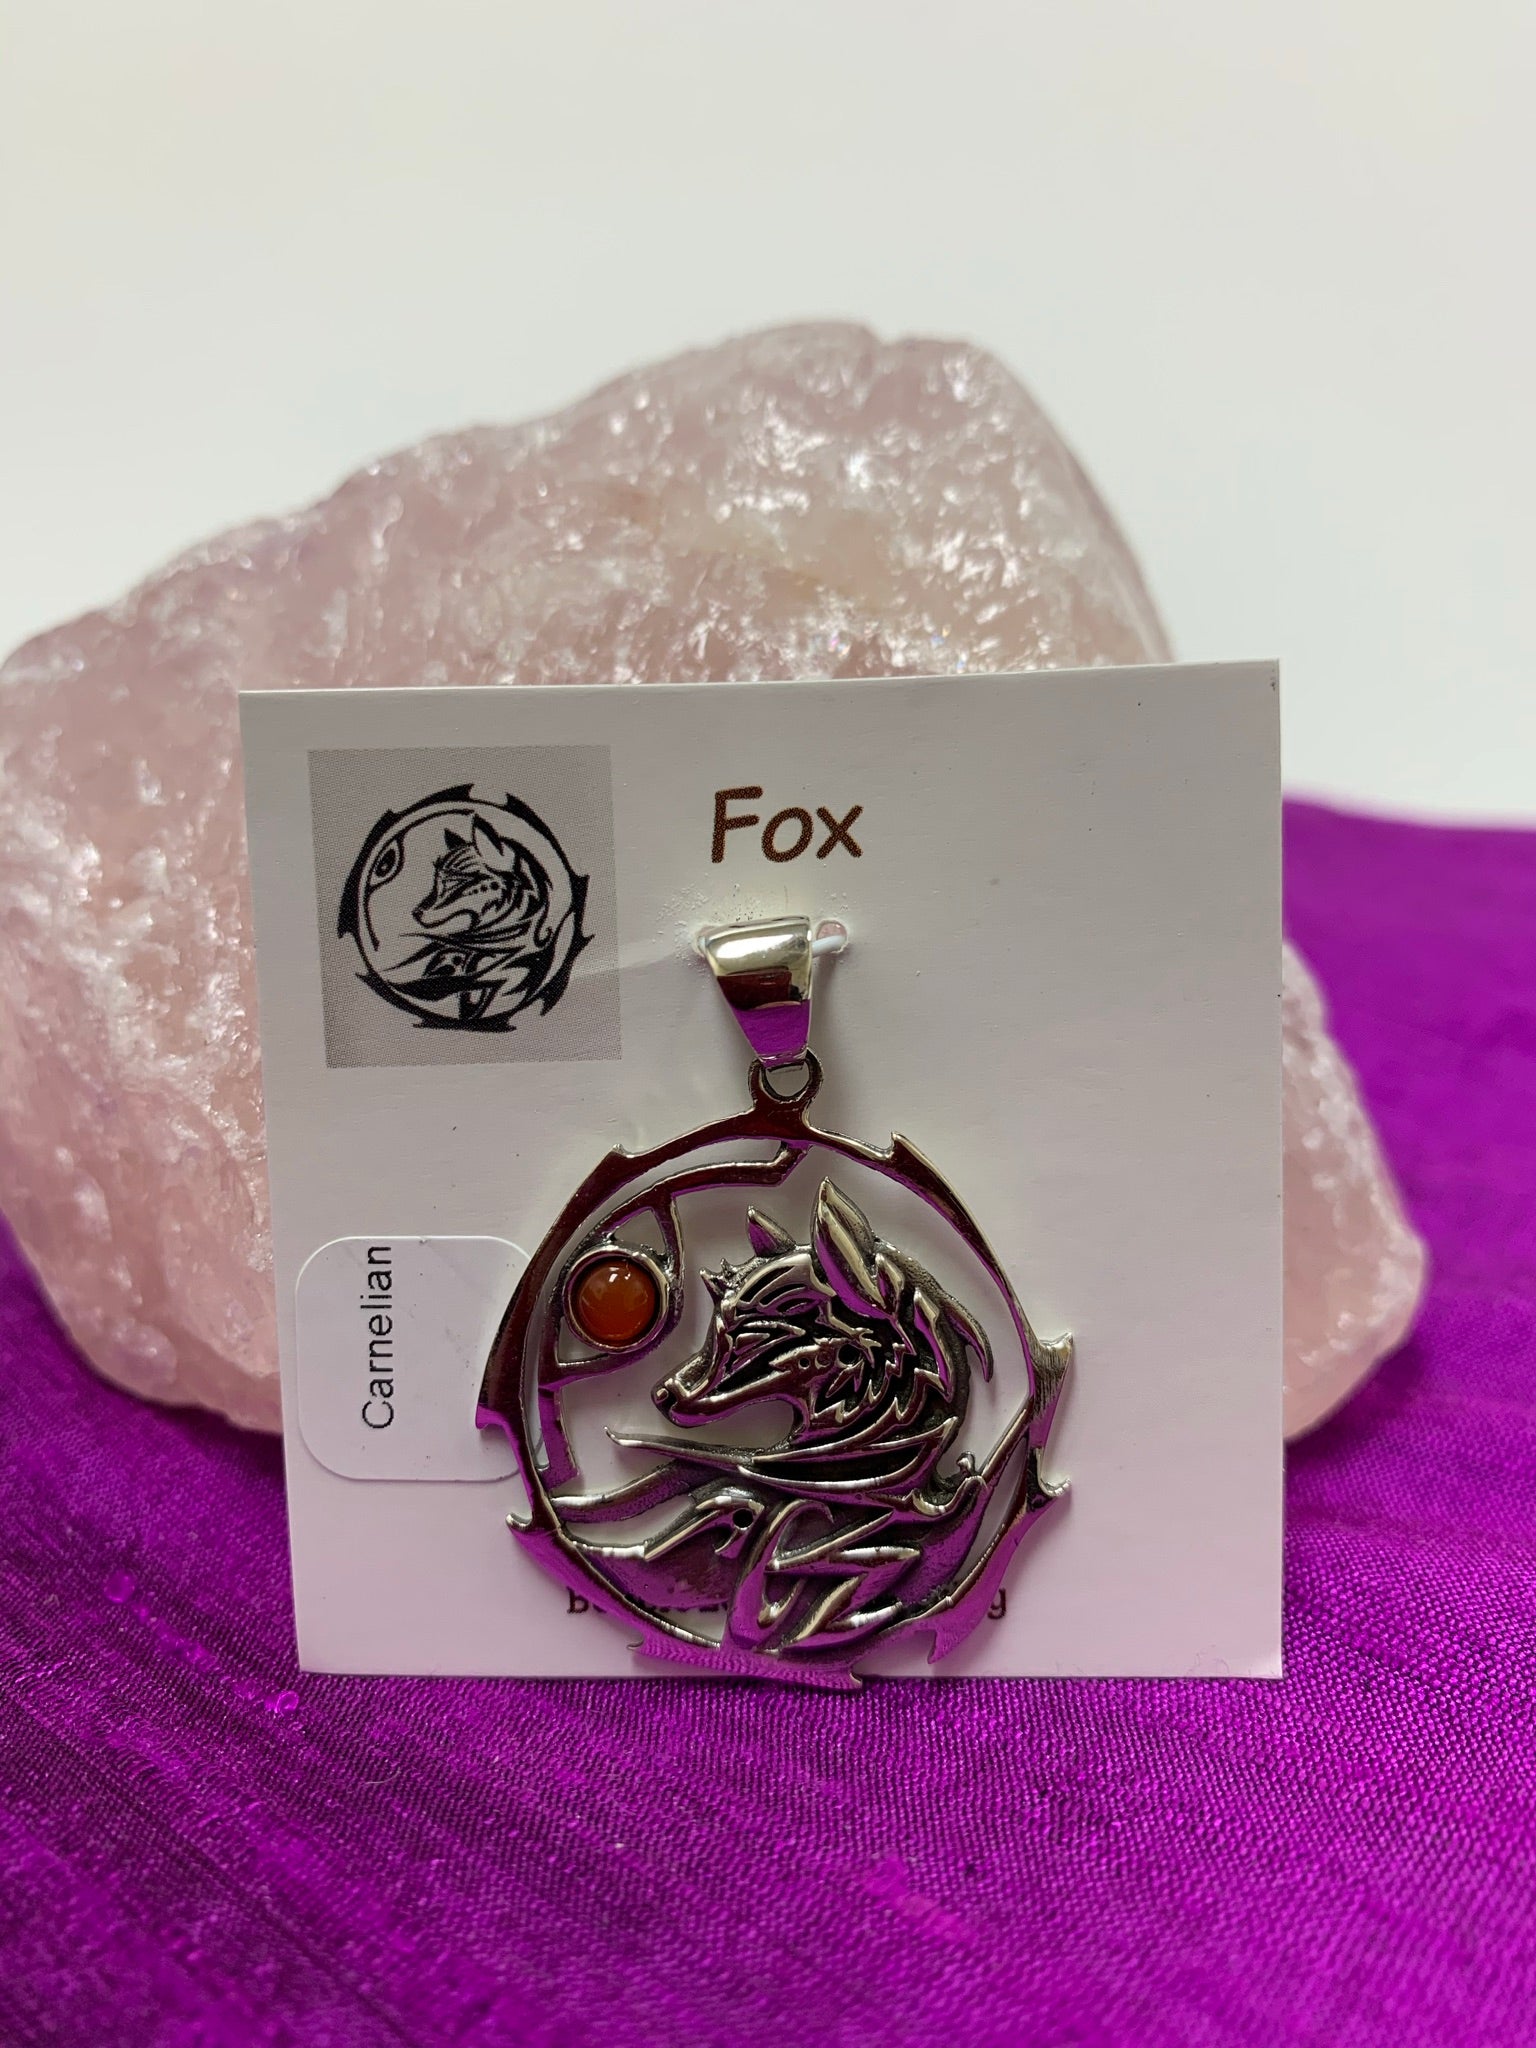 Sterling silver fox animal spirit pendant accented with a carnelian gemstone. The sterling silver fox is set inside an open, stylized sterling silver circle with the carnelian alongside of it. Wear your spirit animal and take its energy everywhere you go! Pendant only - necklace chain not included. 